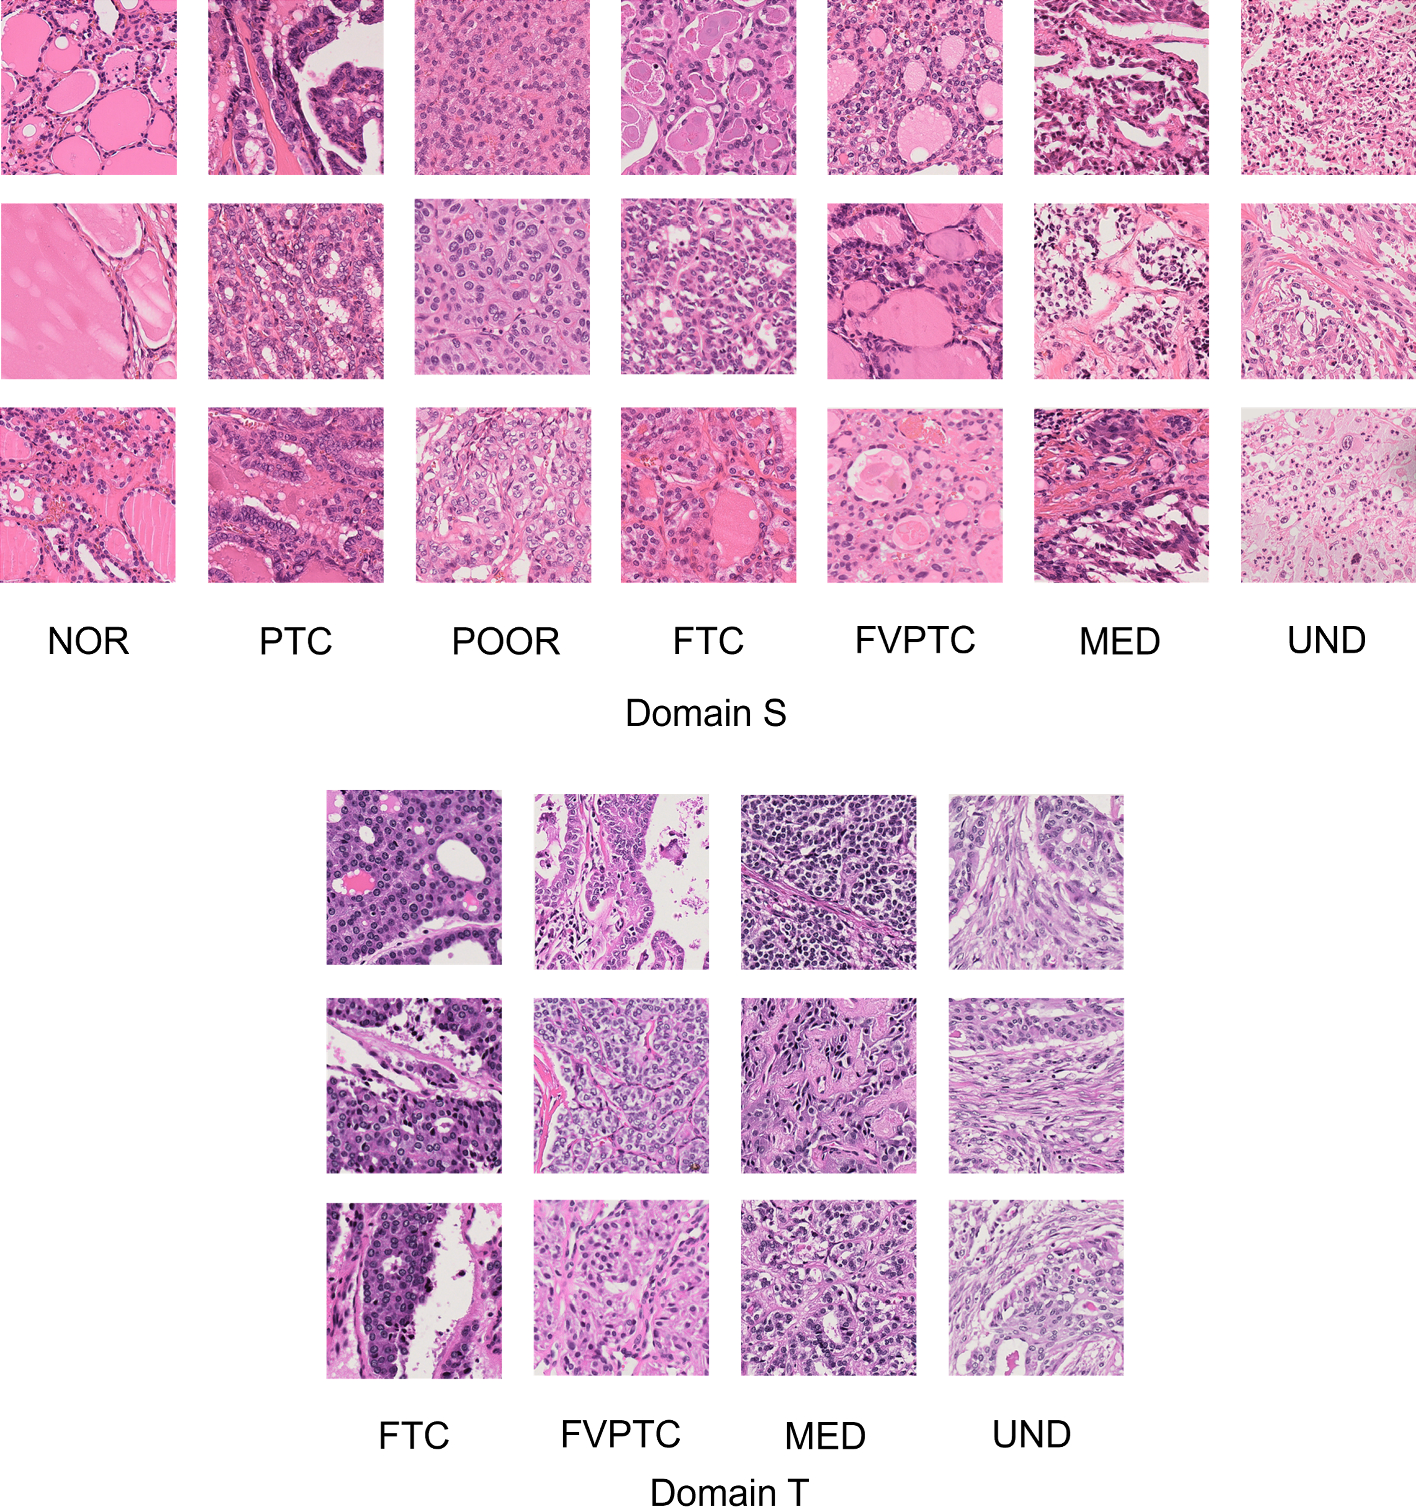 Domain transformation using semi-supervised CycleGAN for improving performance of classifying thyroid tissue images